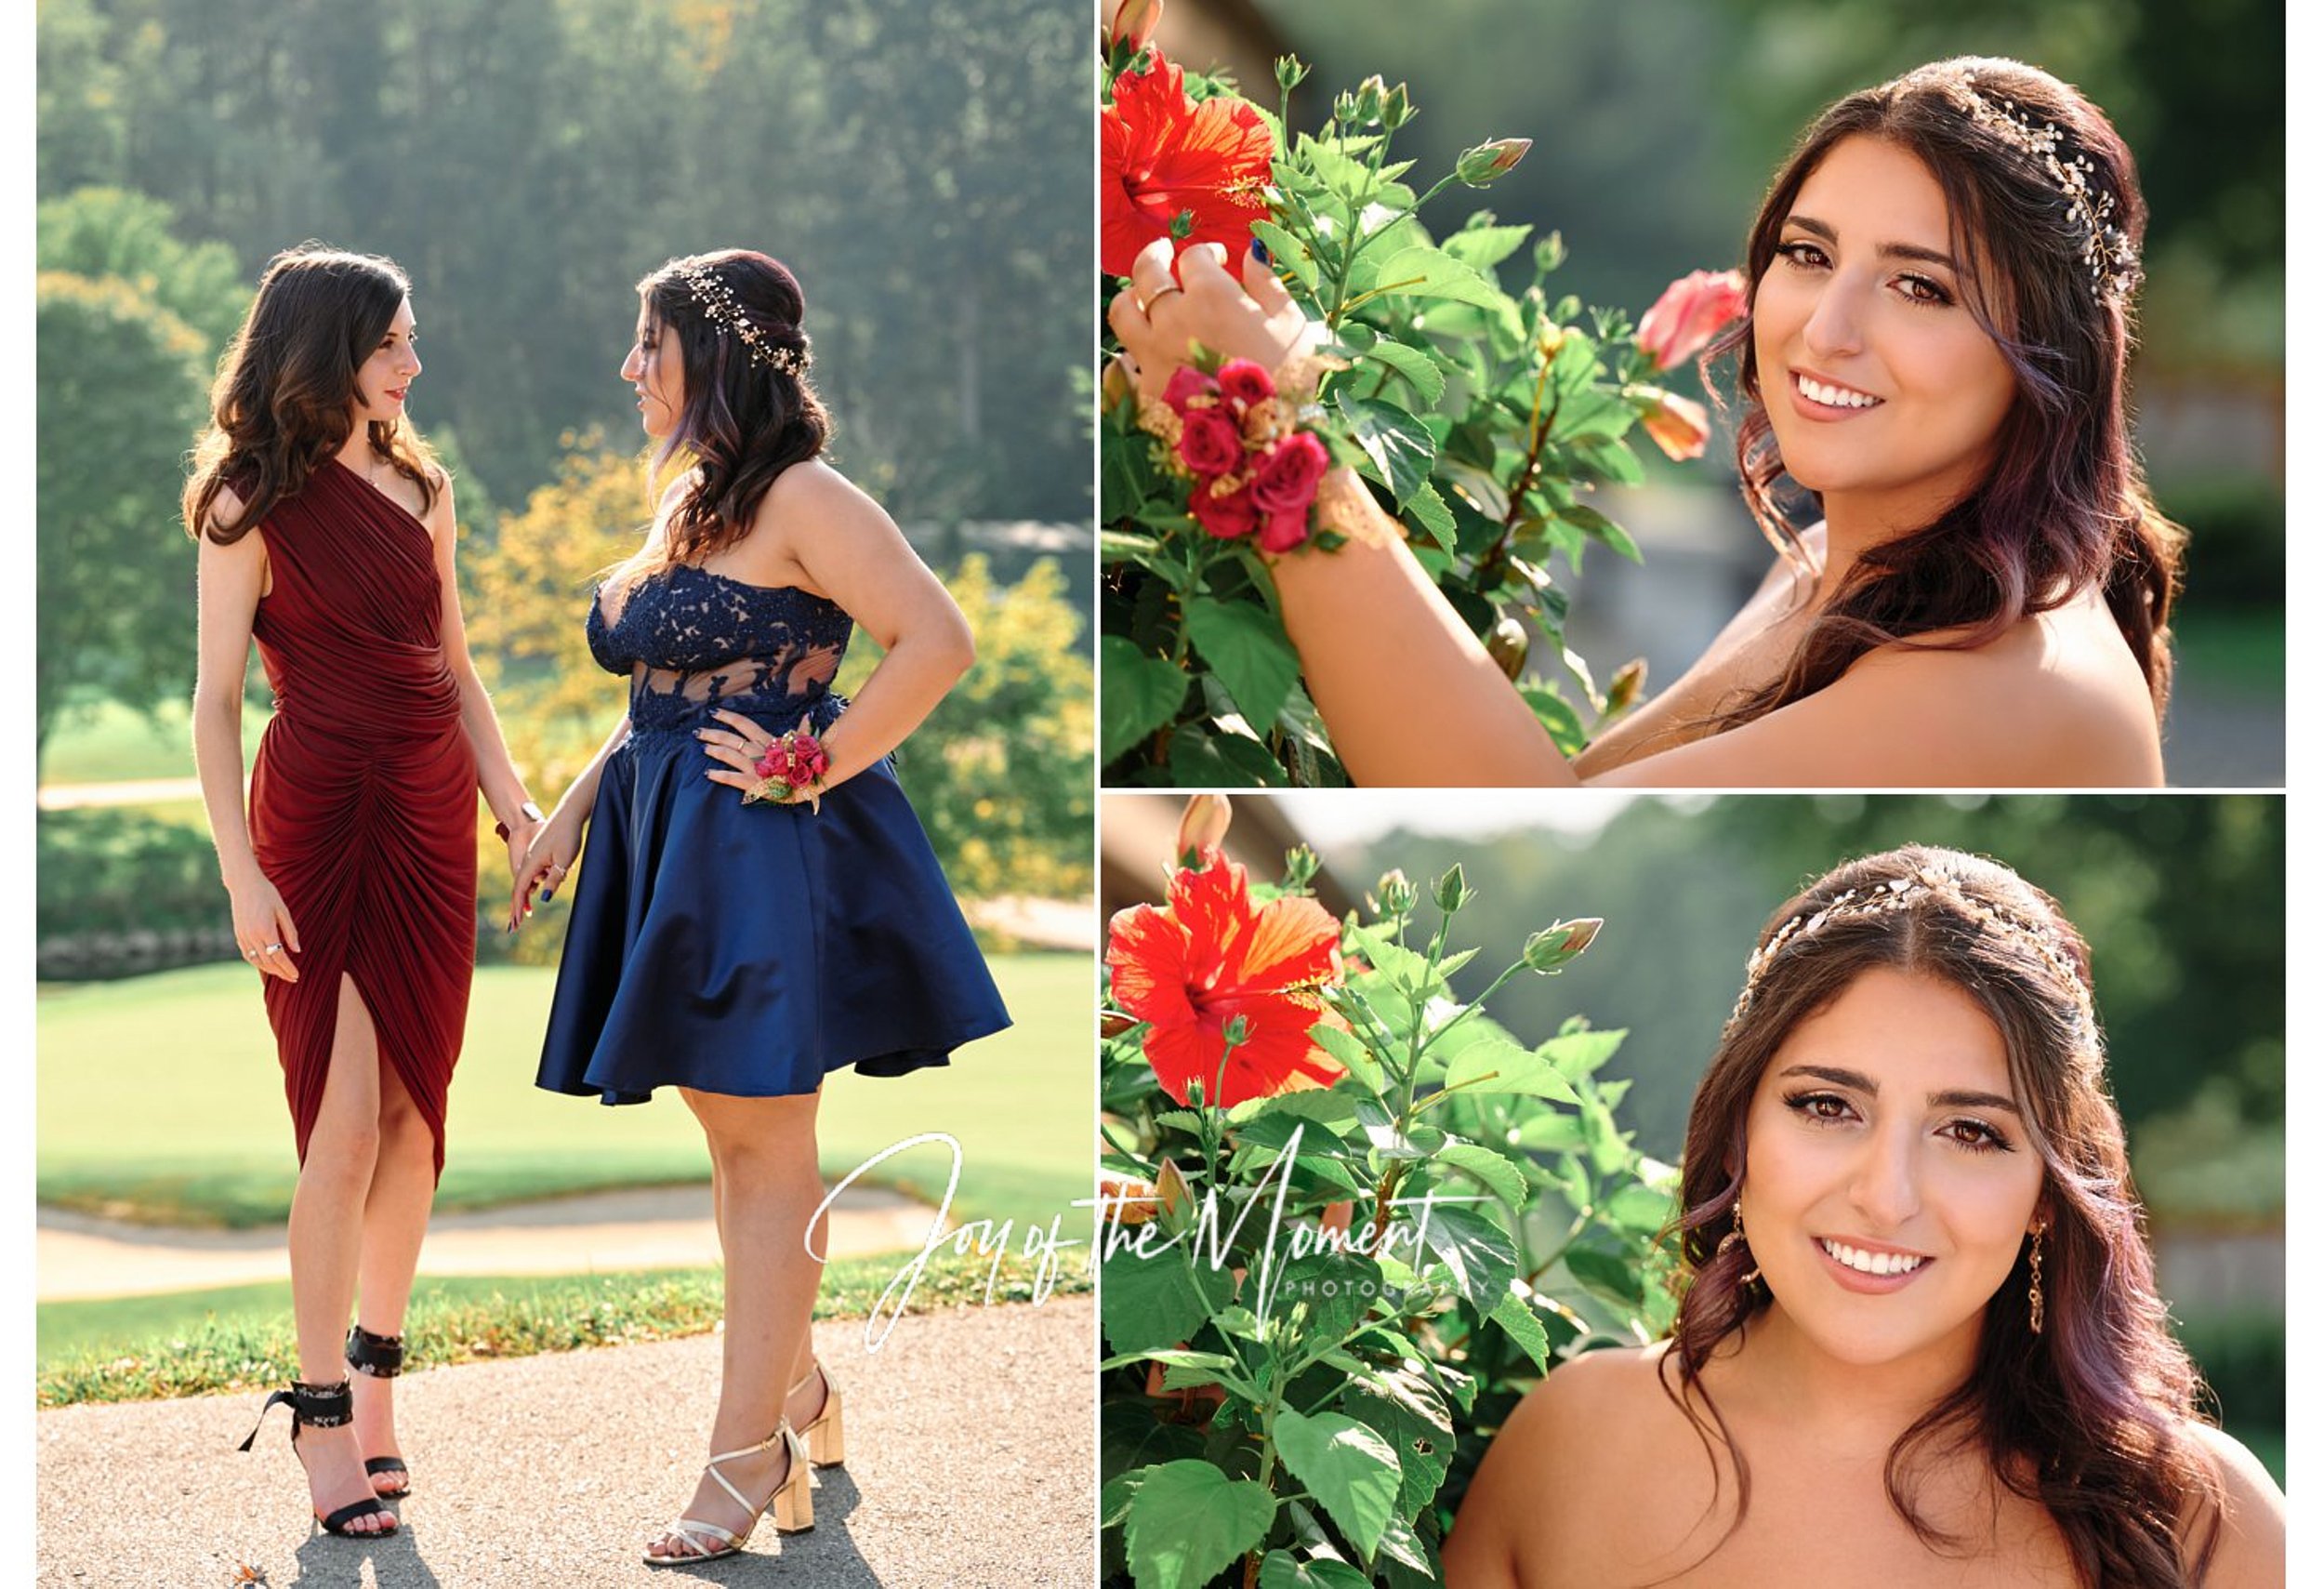  Portraits from Homecoming Dance at Valley Brook Country Club, south of Pittsburgh PA.  Nikki Golestan & Jonathan Robert Colombo, Alexandra Cordle & Griffin Hurt. Four teenagers look happy & beautiful 